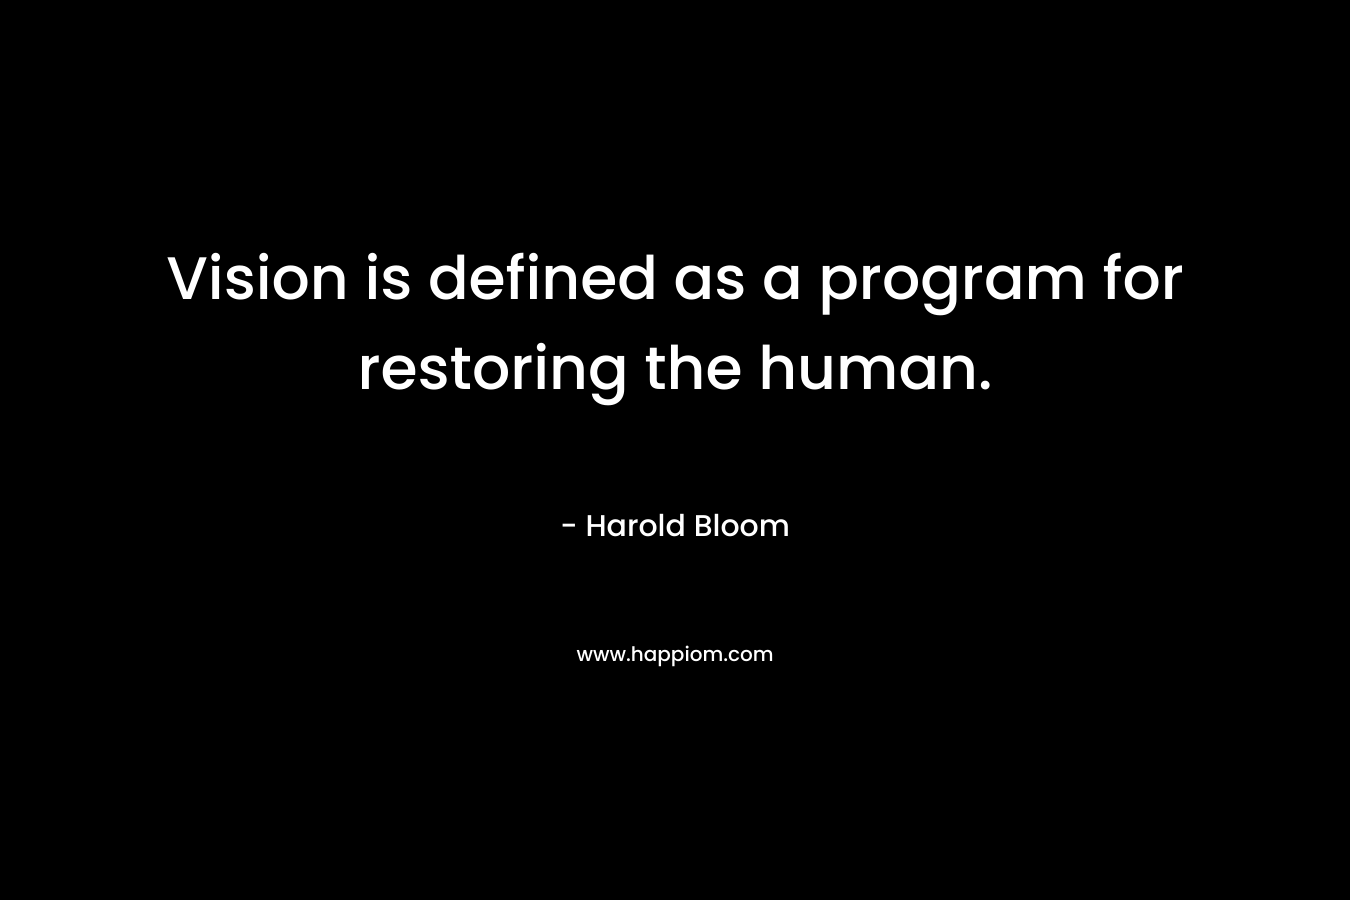 Vision is defined as a program for restoring the human.